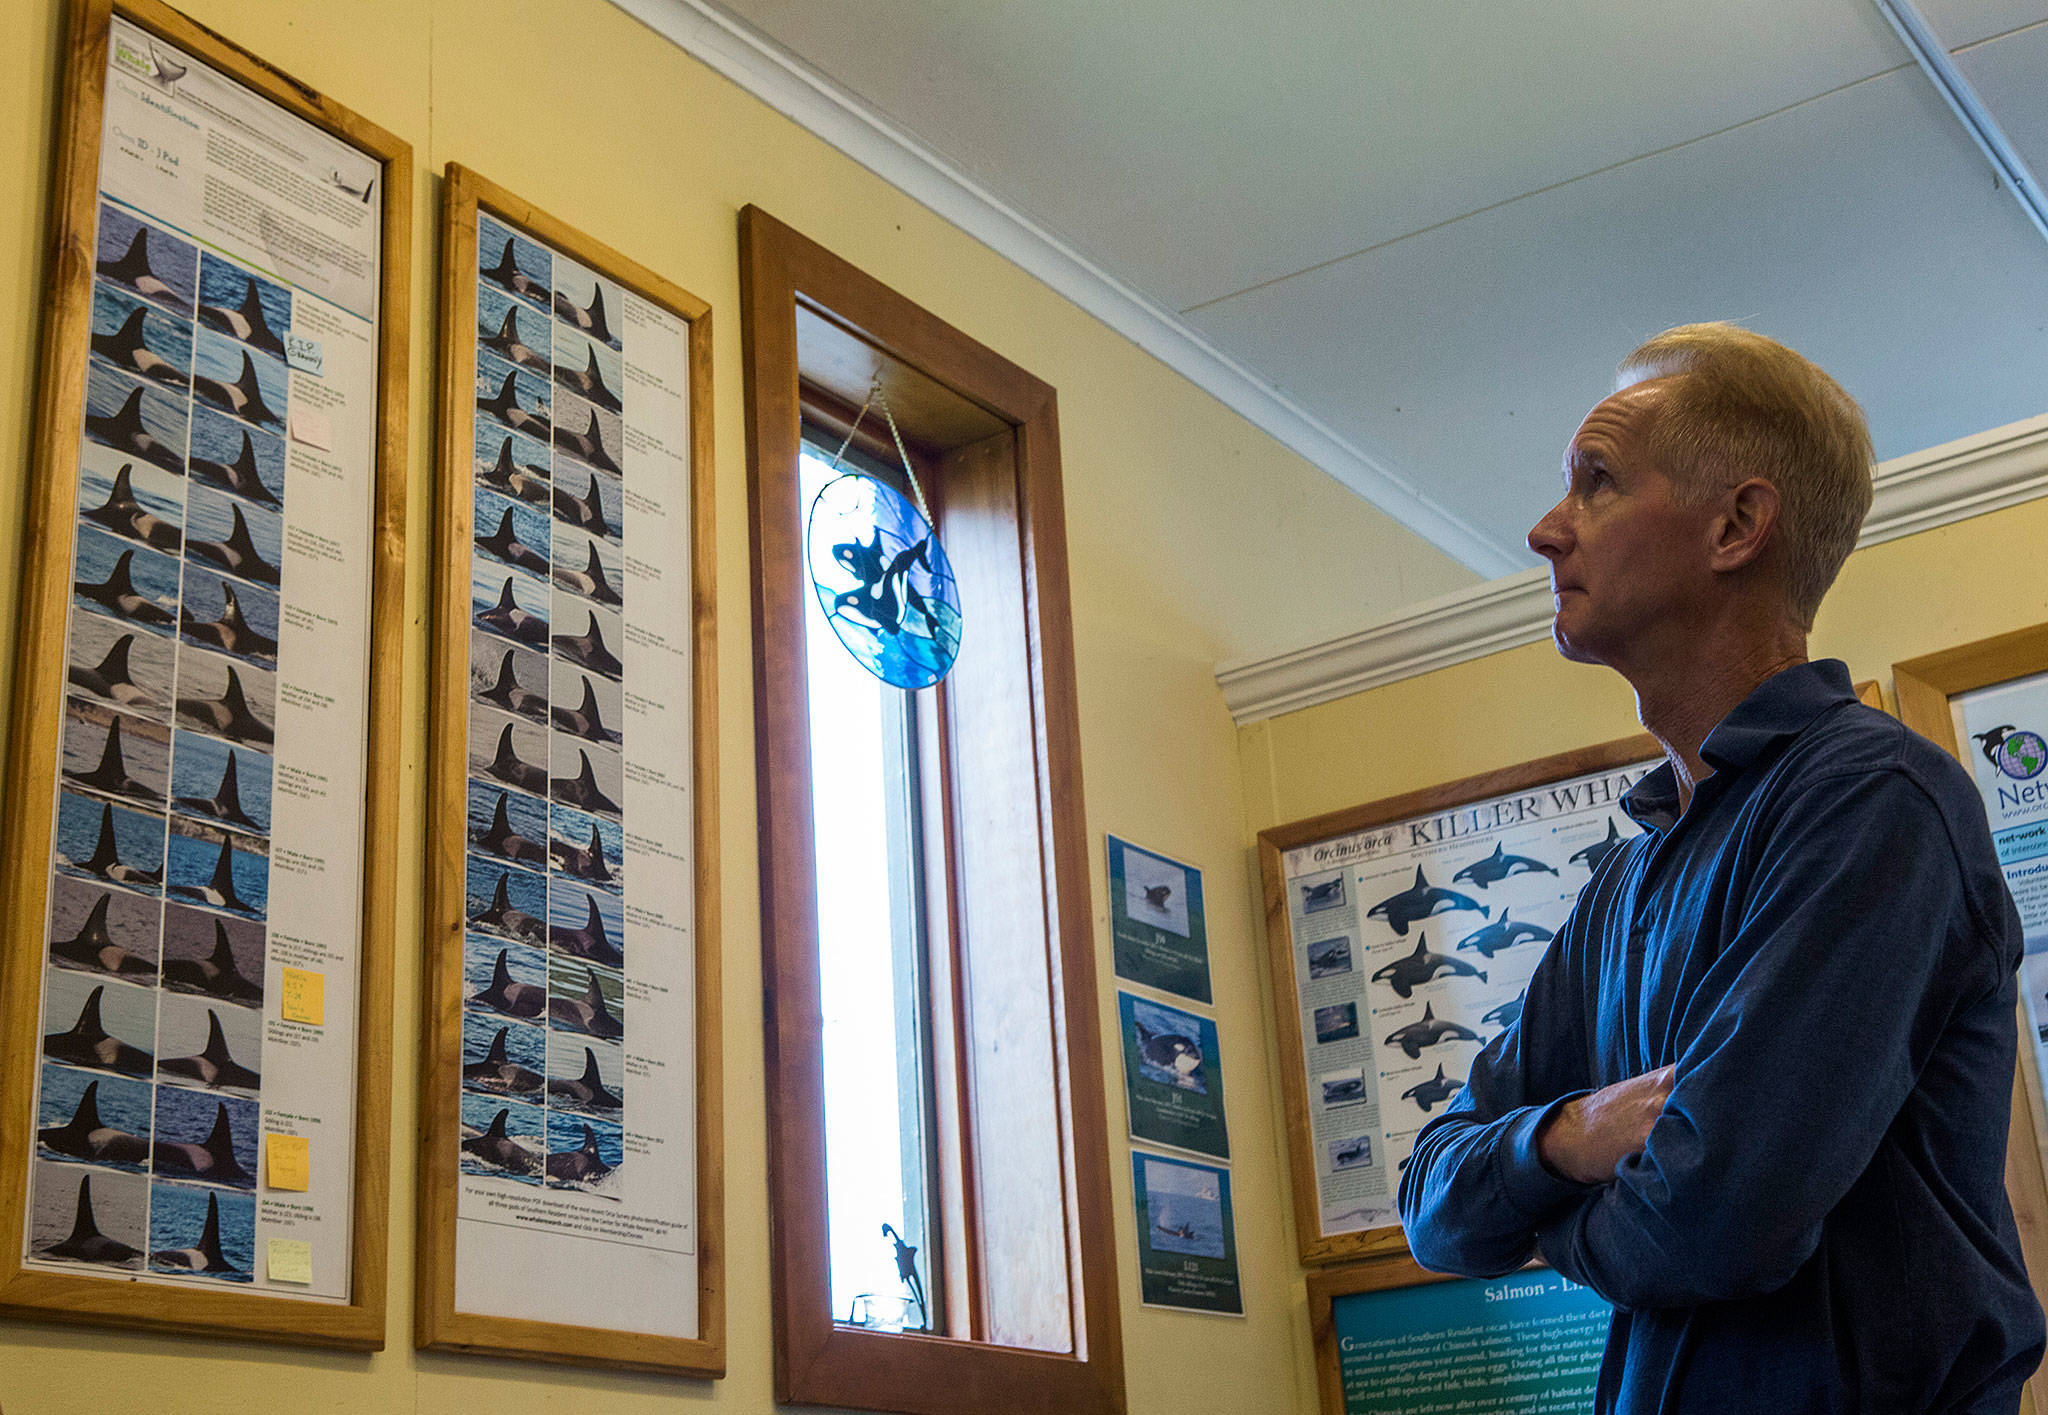 Clayton Wright looks at a chart of different orca whales at the Langley Whale Center. (Olivia Vanni / The Herald)